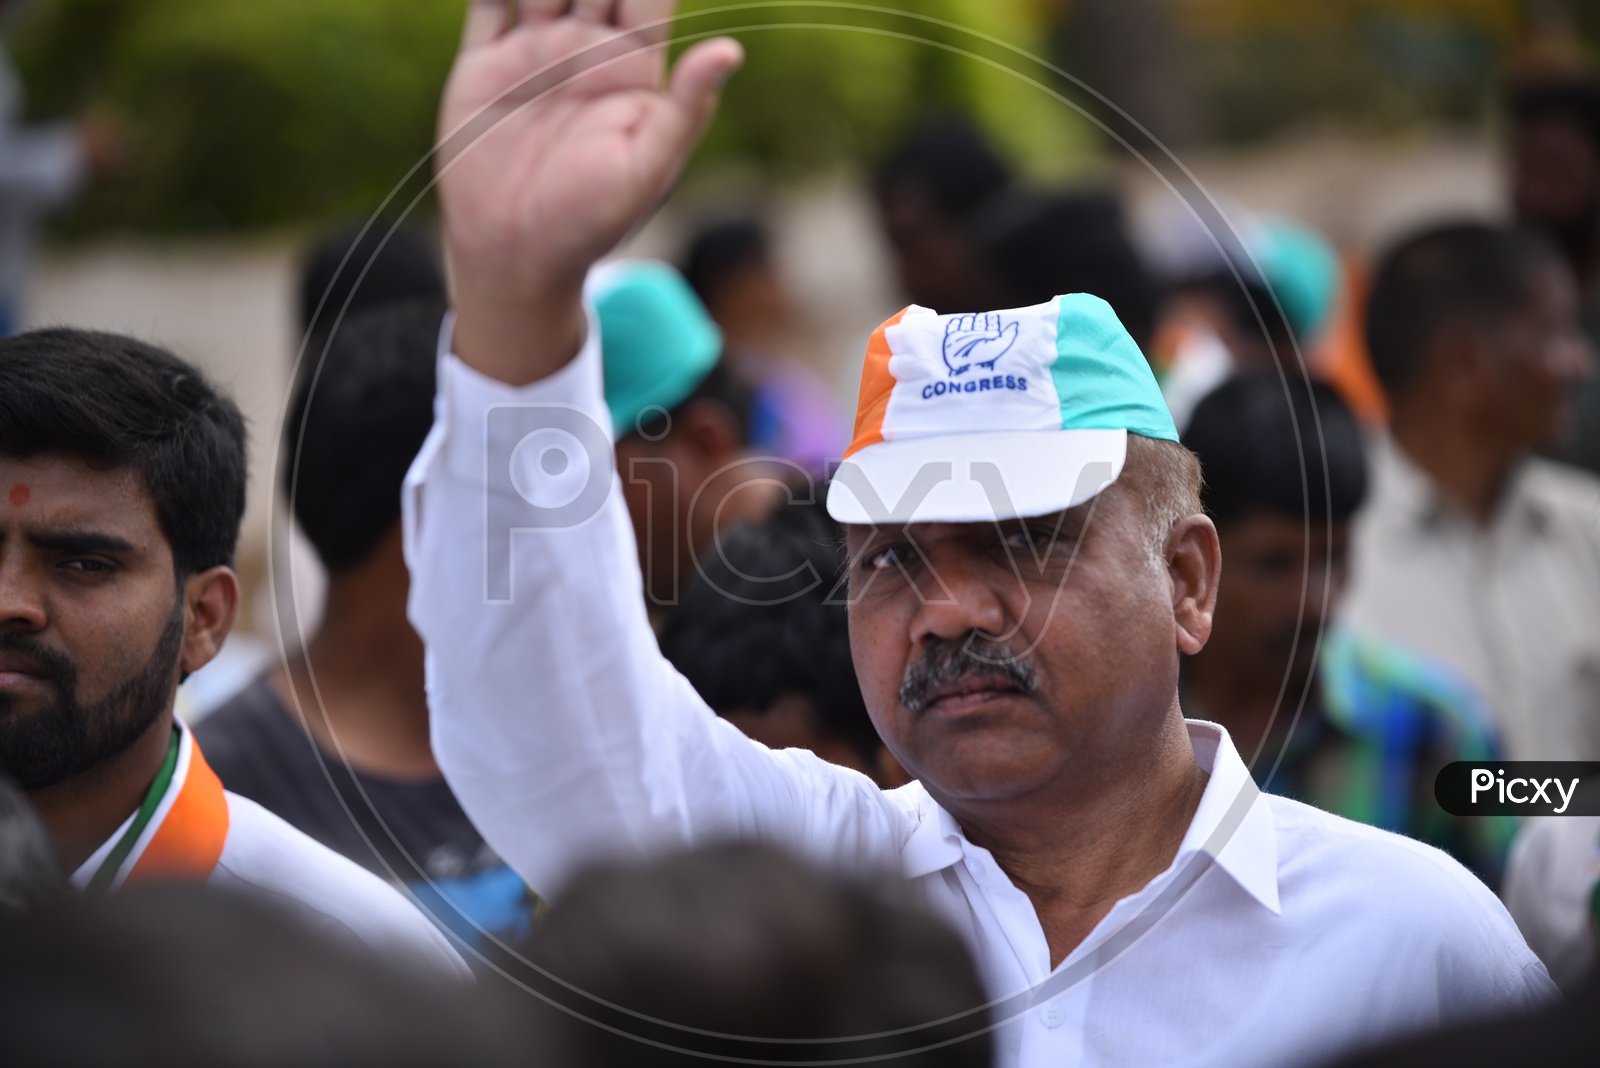 Congress Supporters Wearing Caps In Elections Campaign